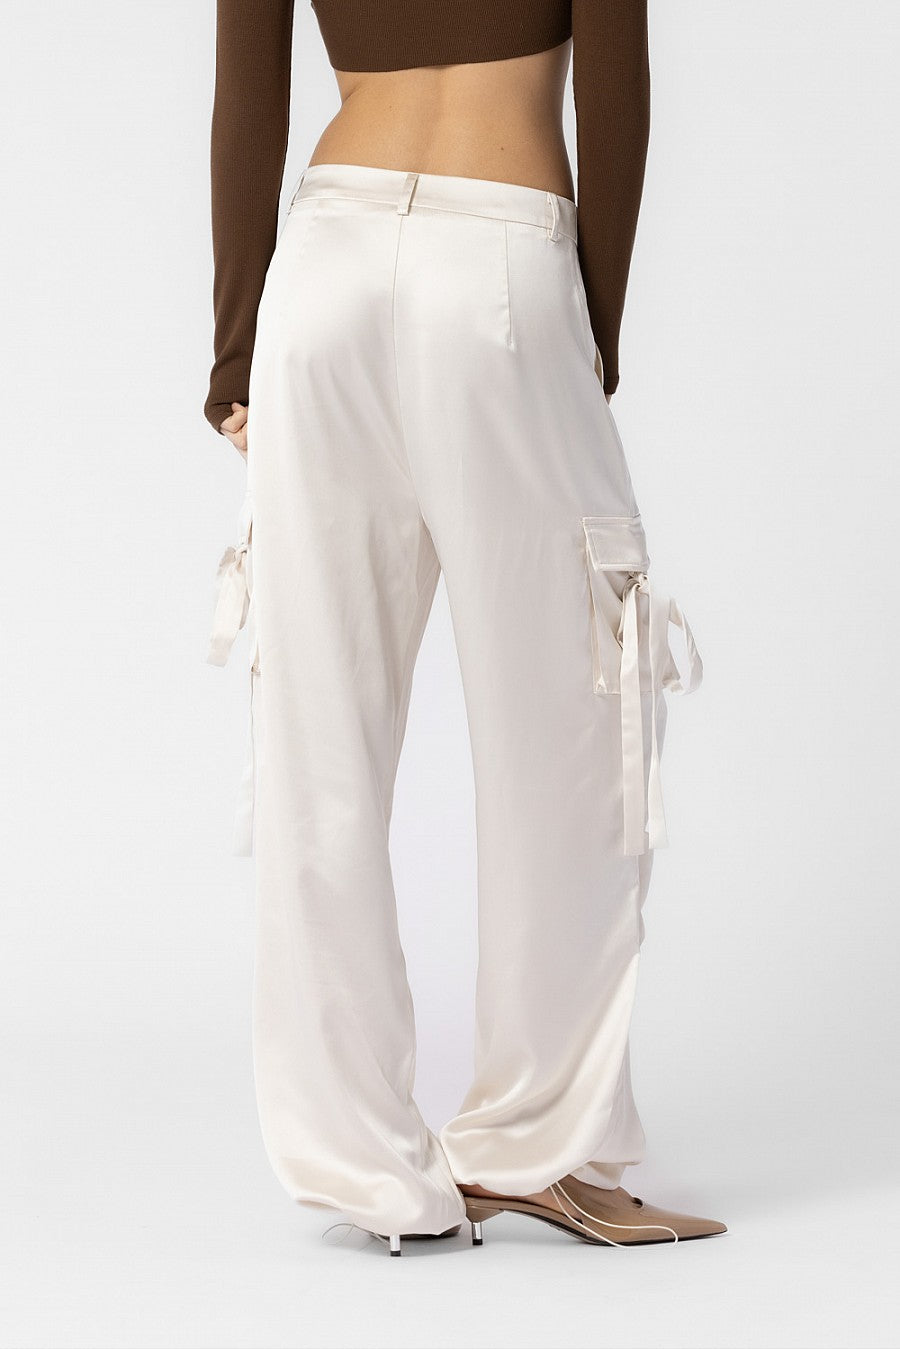 Elly Cargo Pants - Champagne